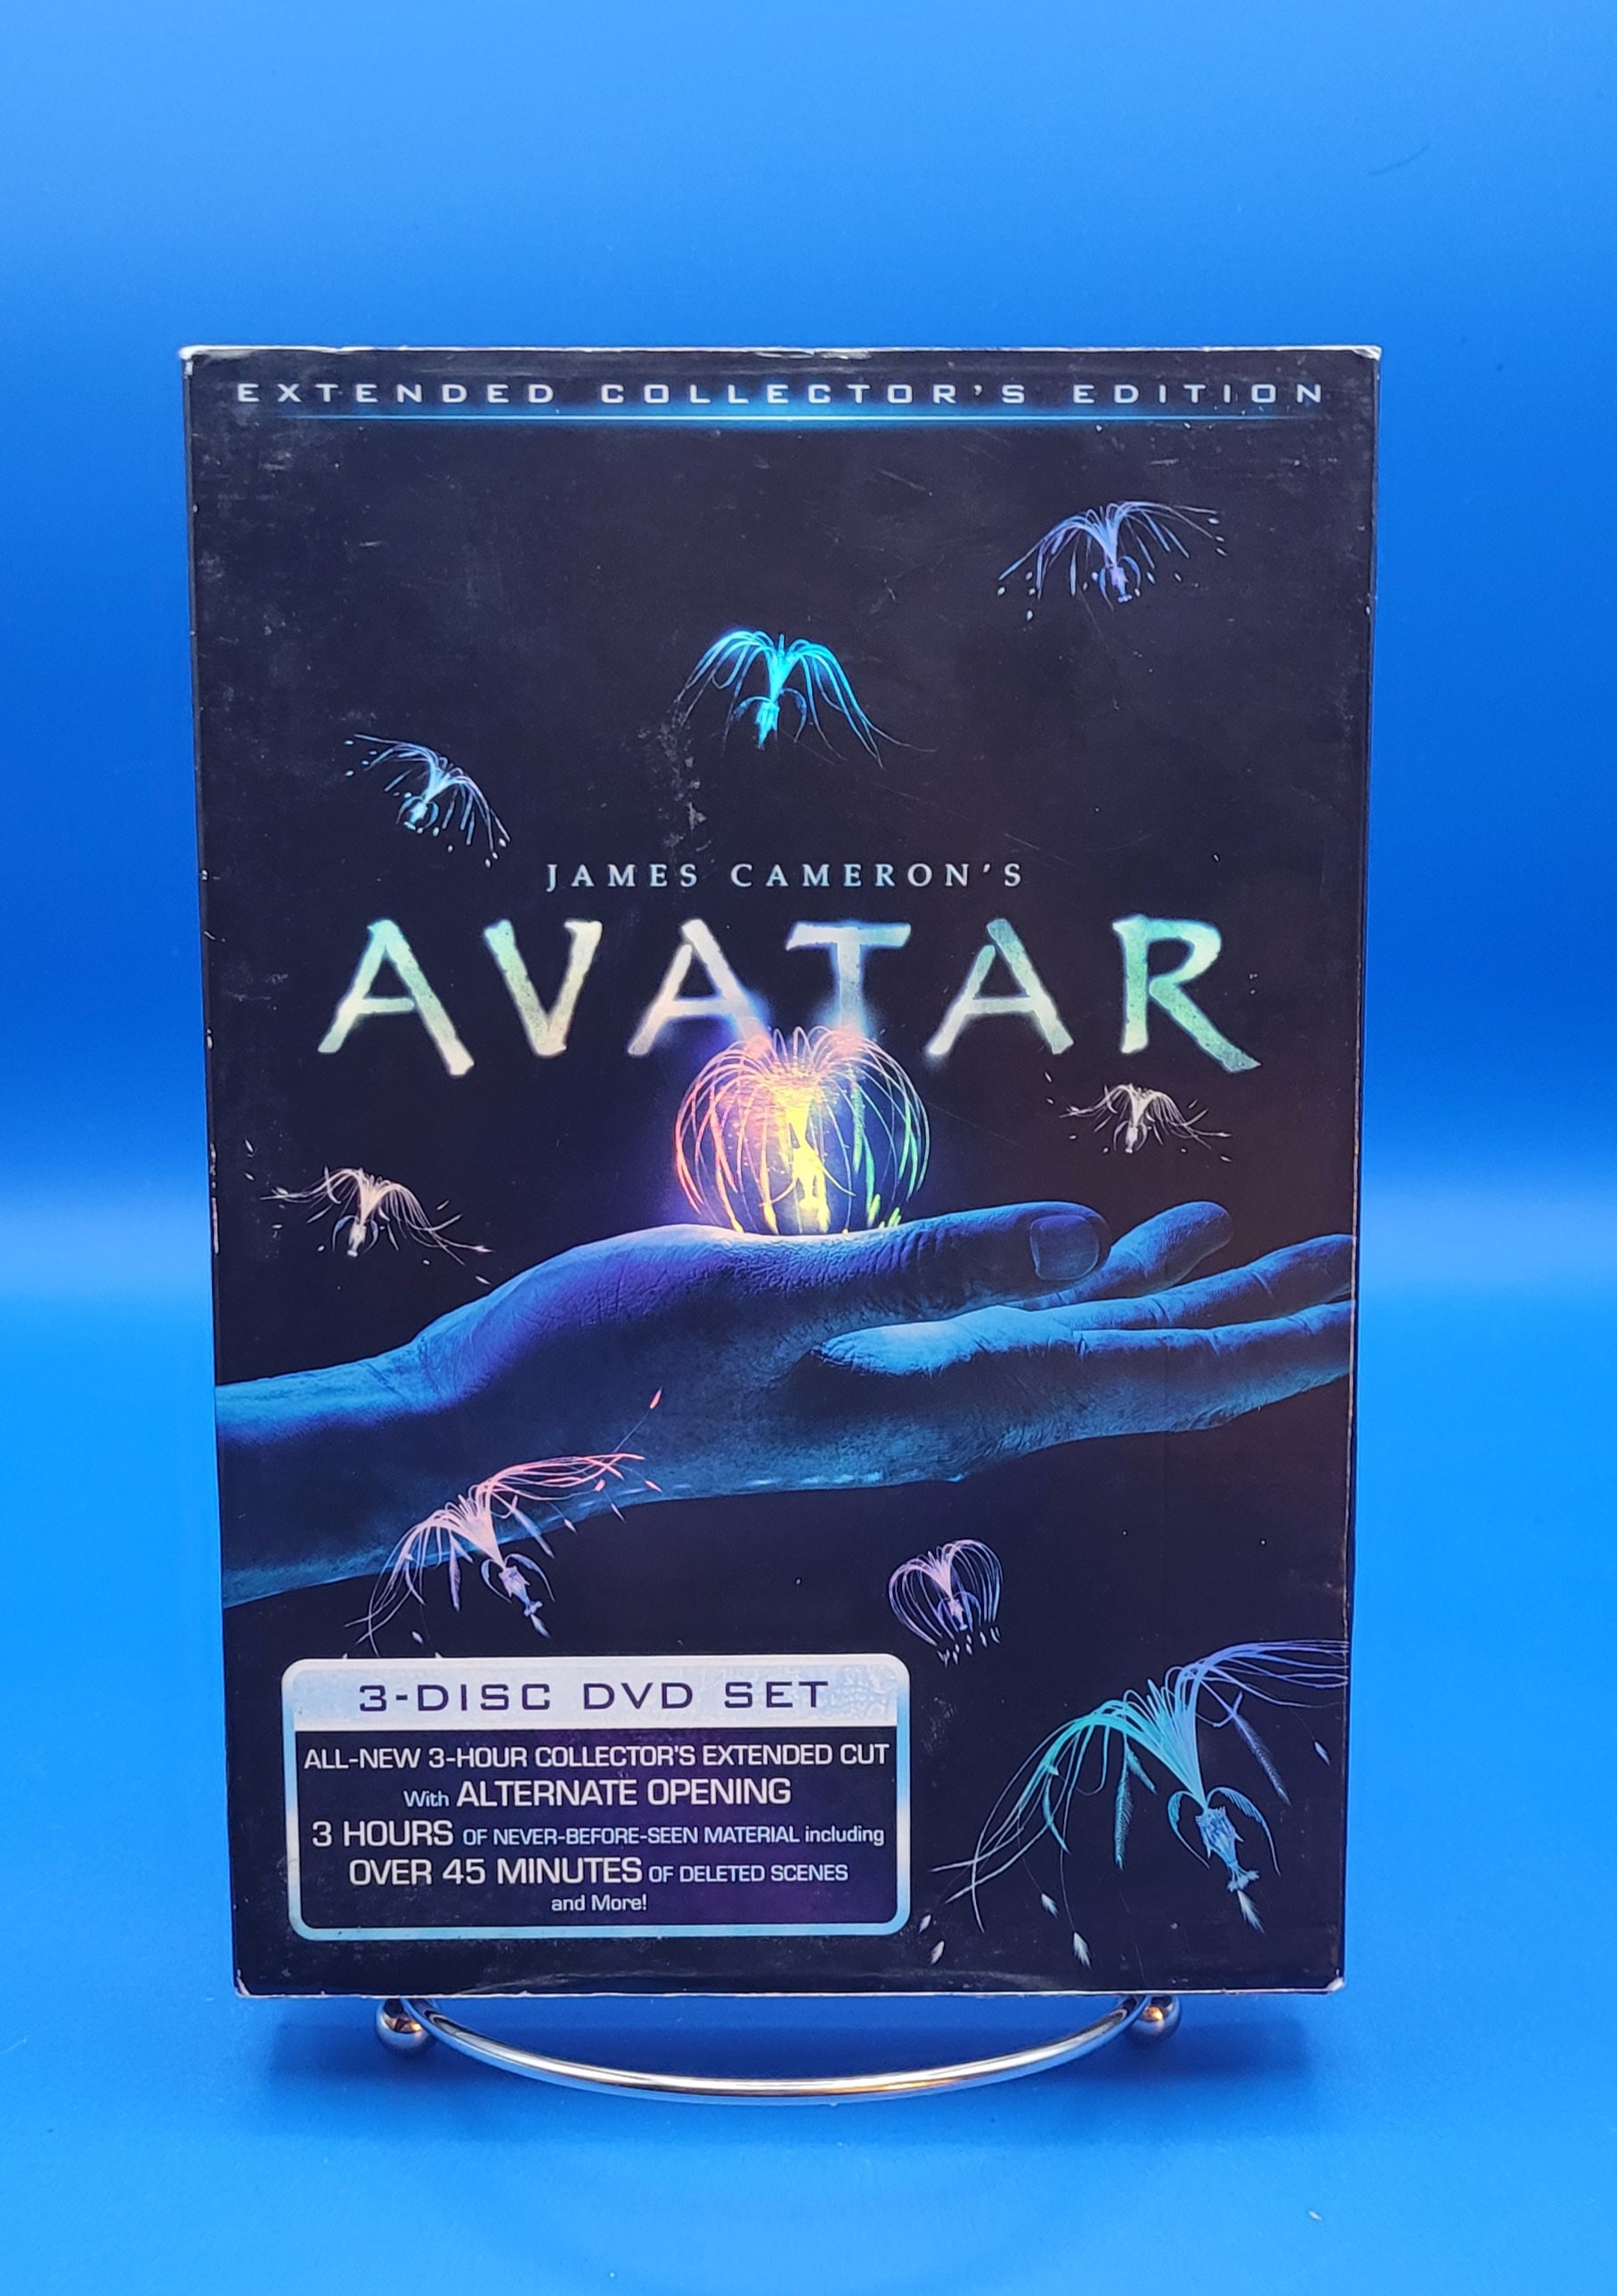 DVD Chinese Drama The King's Avatar 全职高手 Vol.1-40 End (2019